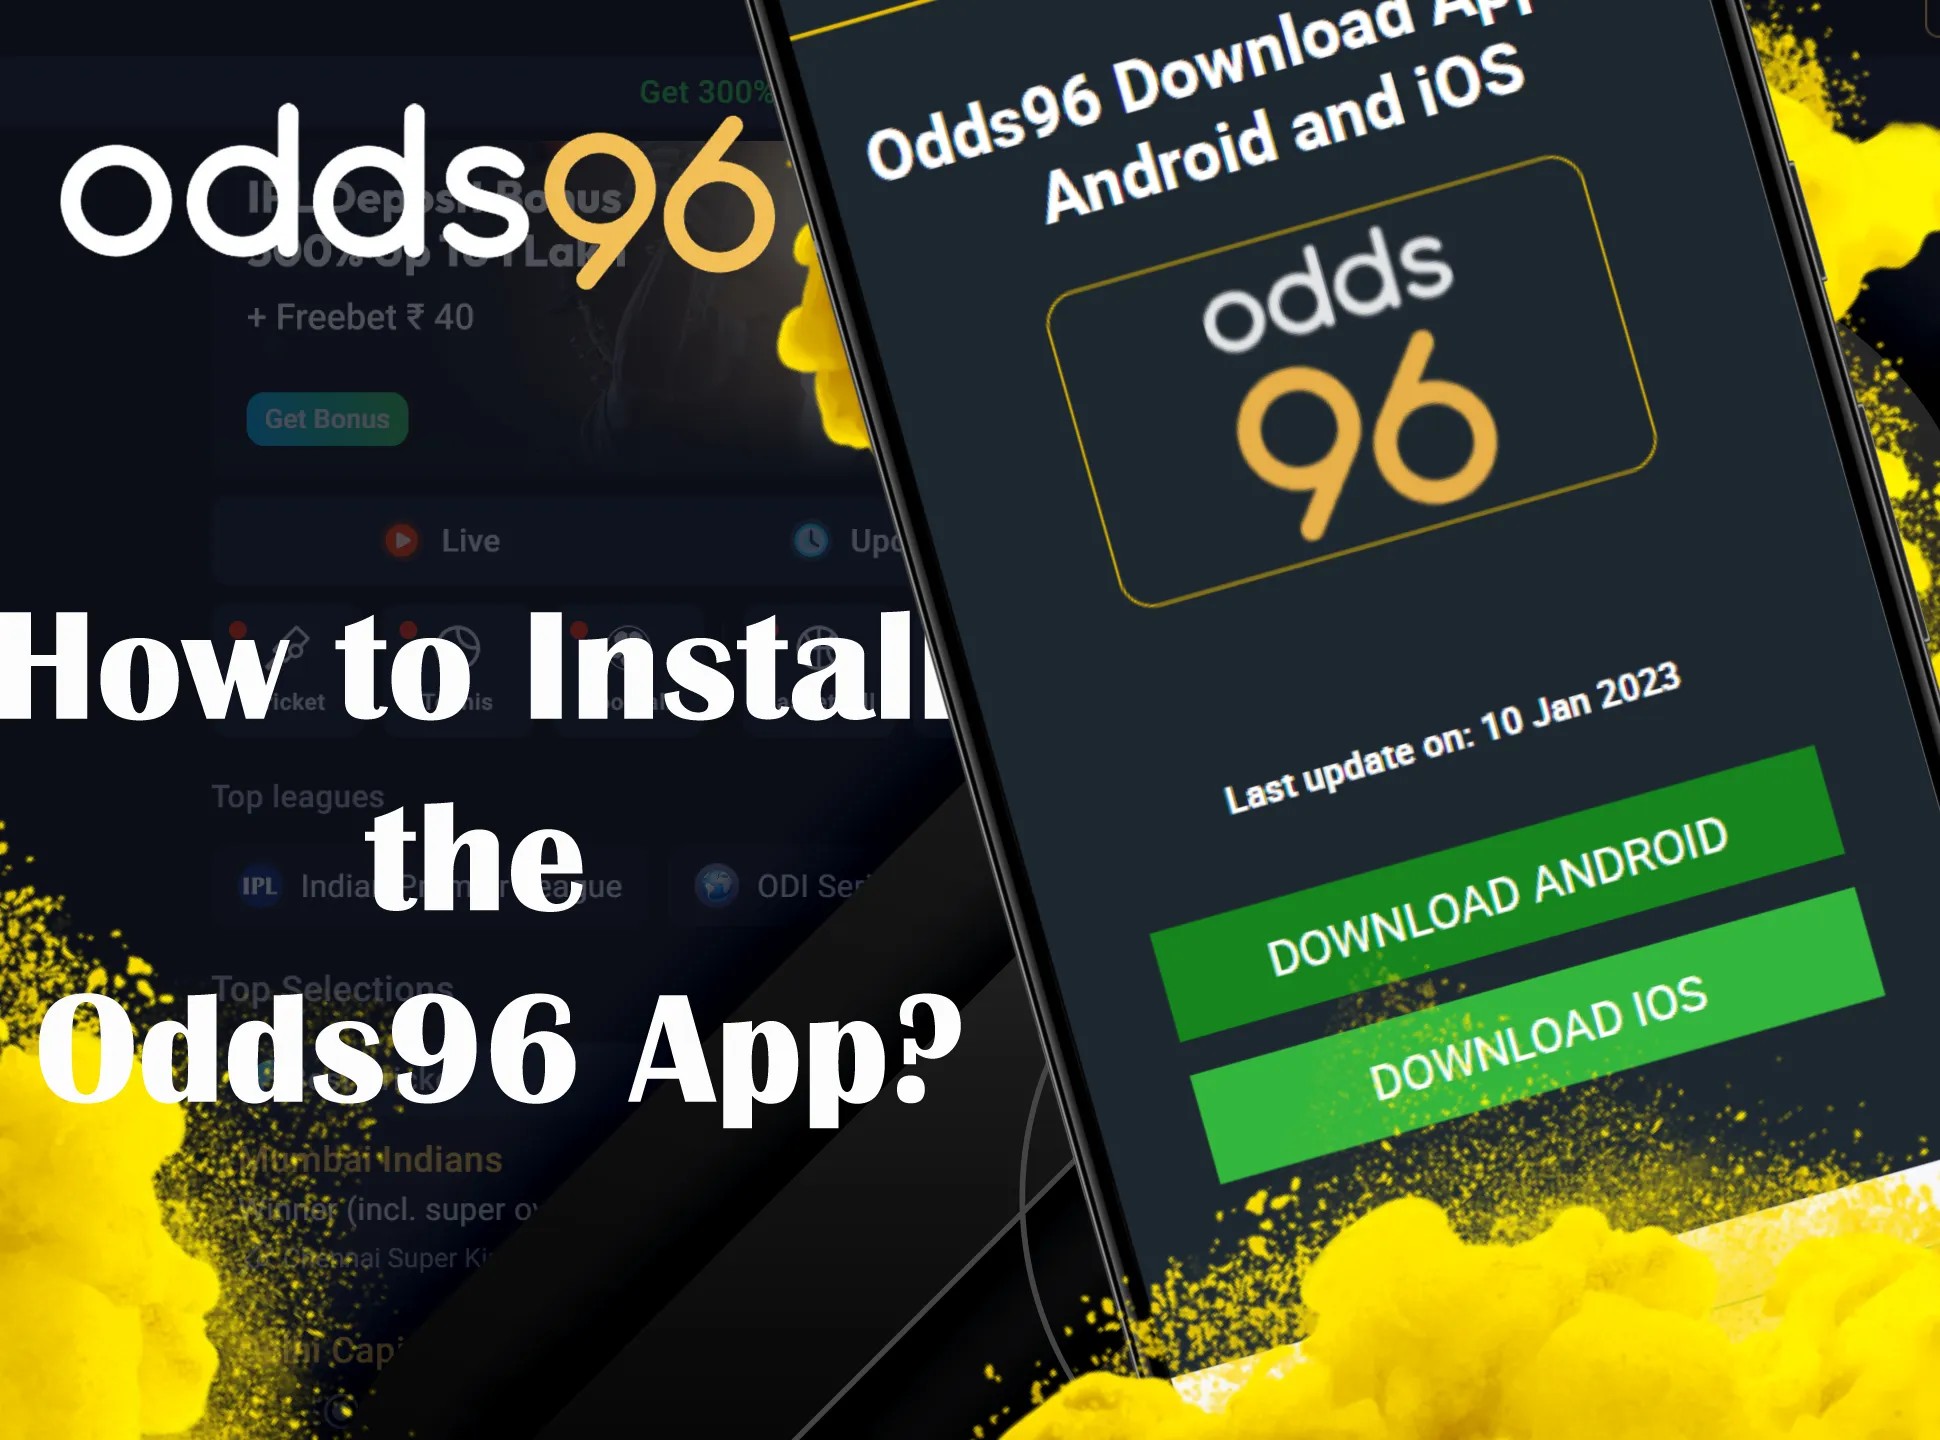 Installation of Odds96 app is very easy.